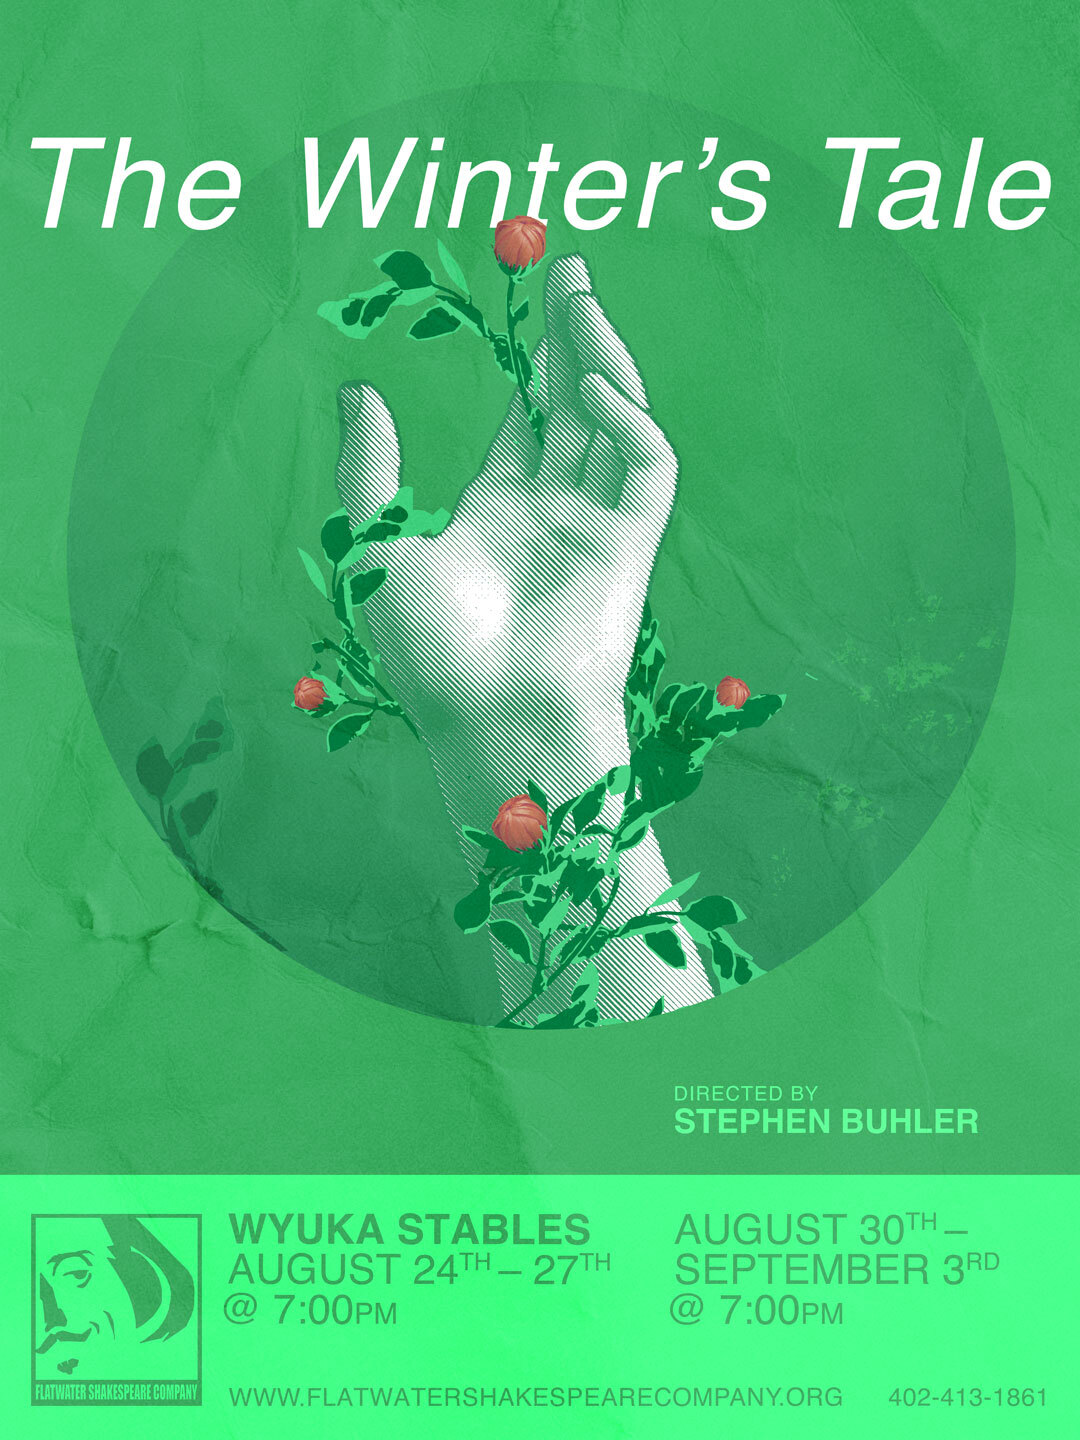 8/25 STU - STUDENT: Friday. August 25, 2023 | 7:00 p.m. - 10:00 p.m. CST | Wyuka Stables (The Winter's Tale)